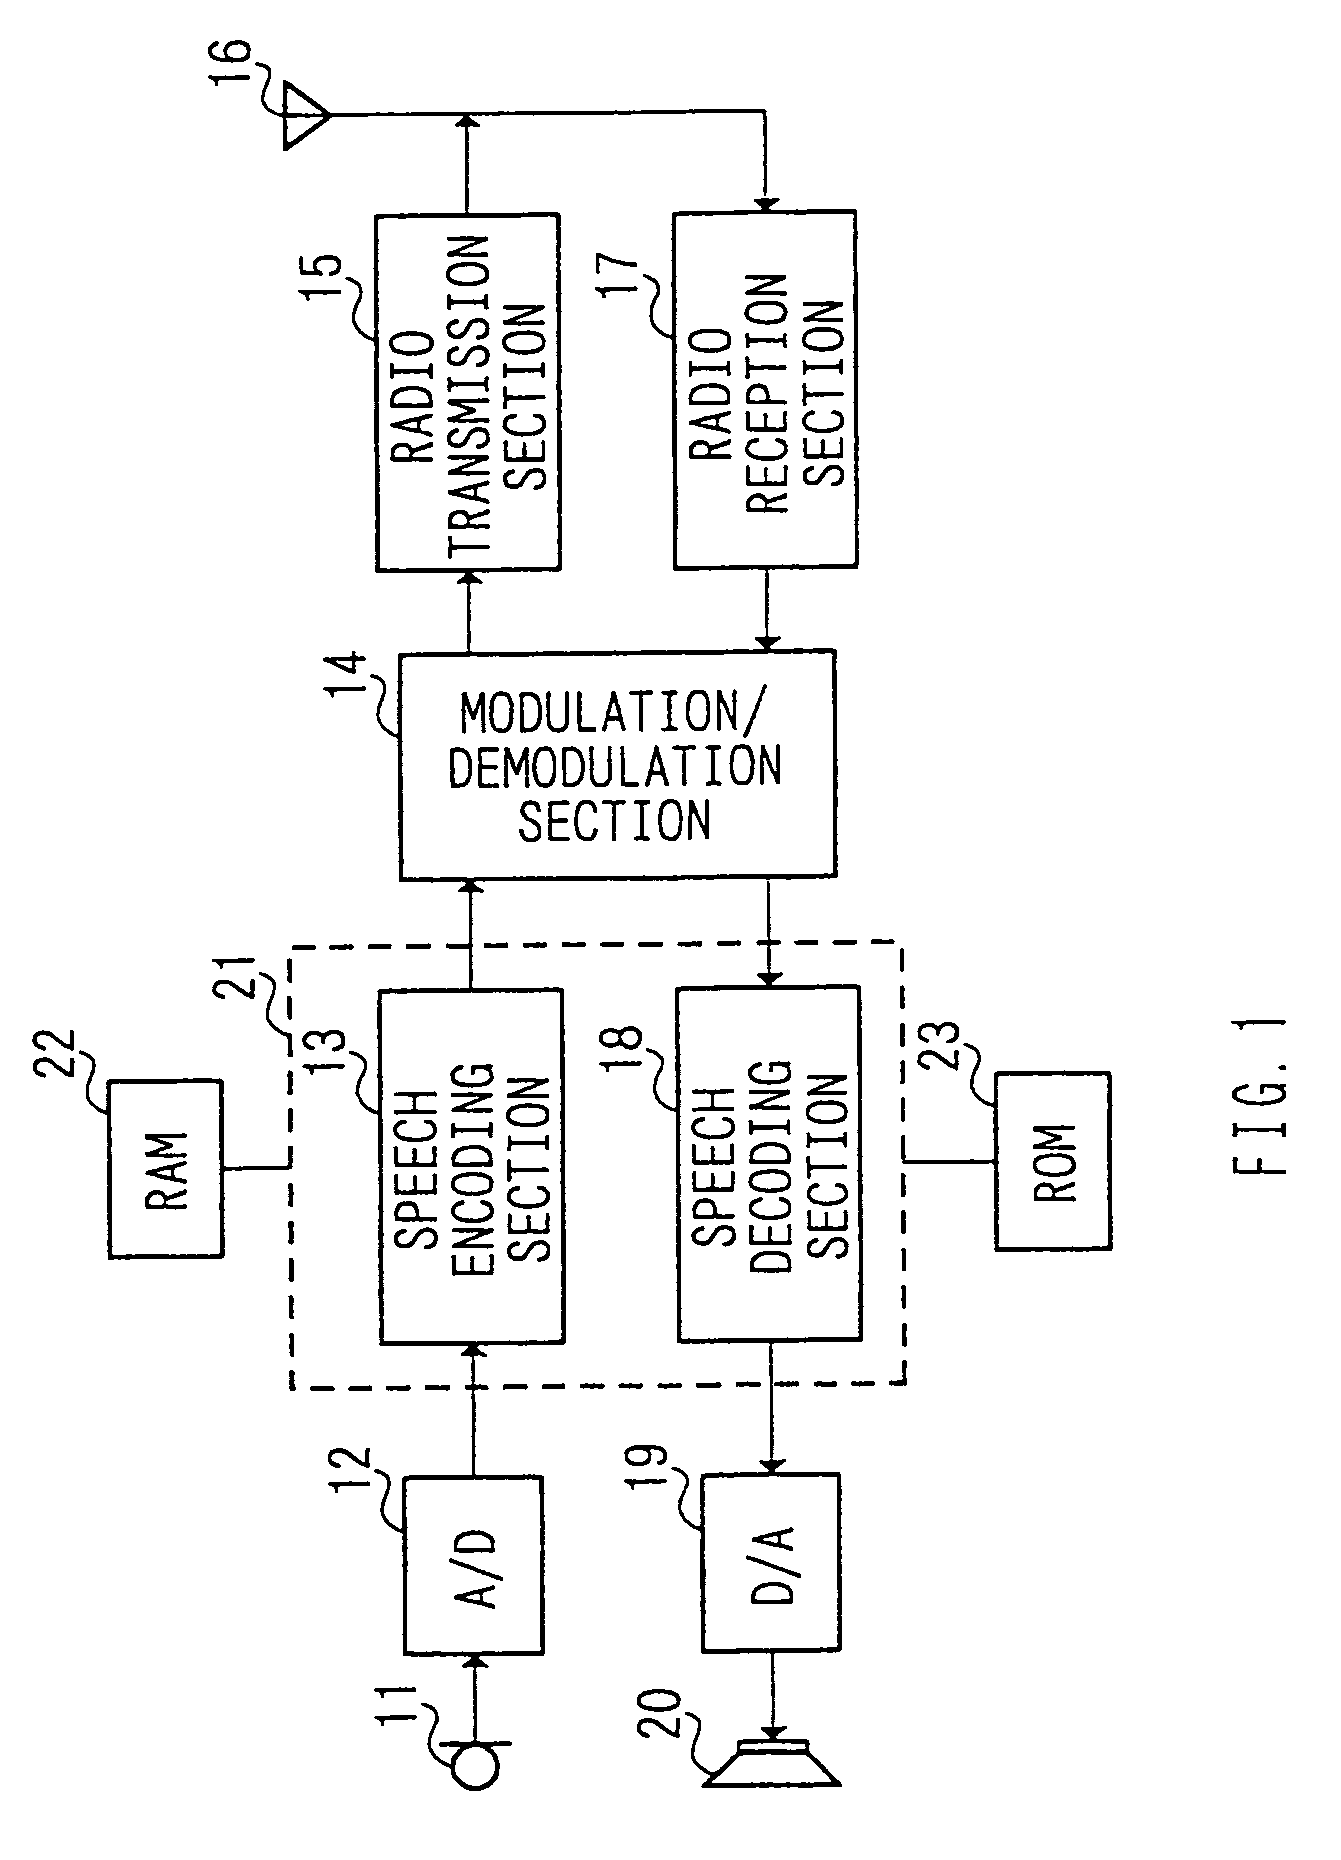 Apparatus and method for speech coding